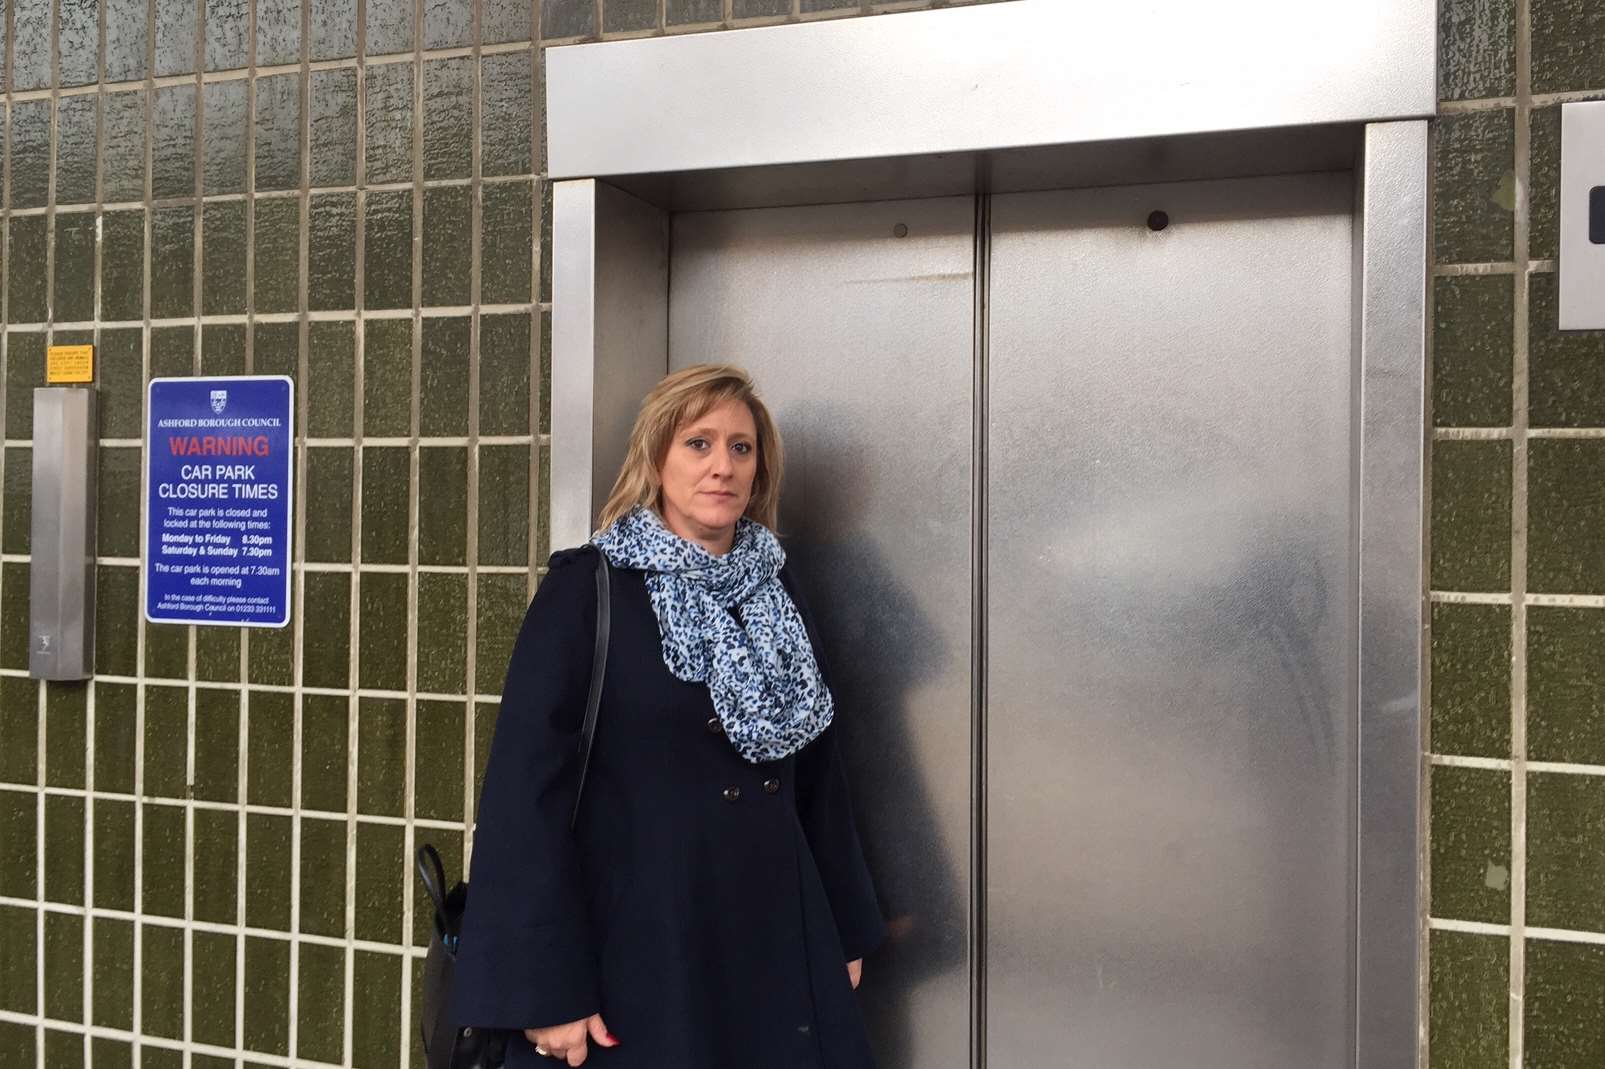 Tracey Farrin got stuck in the lift in Park Street